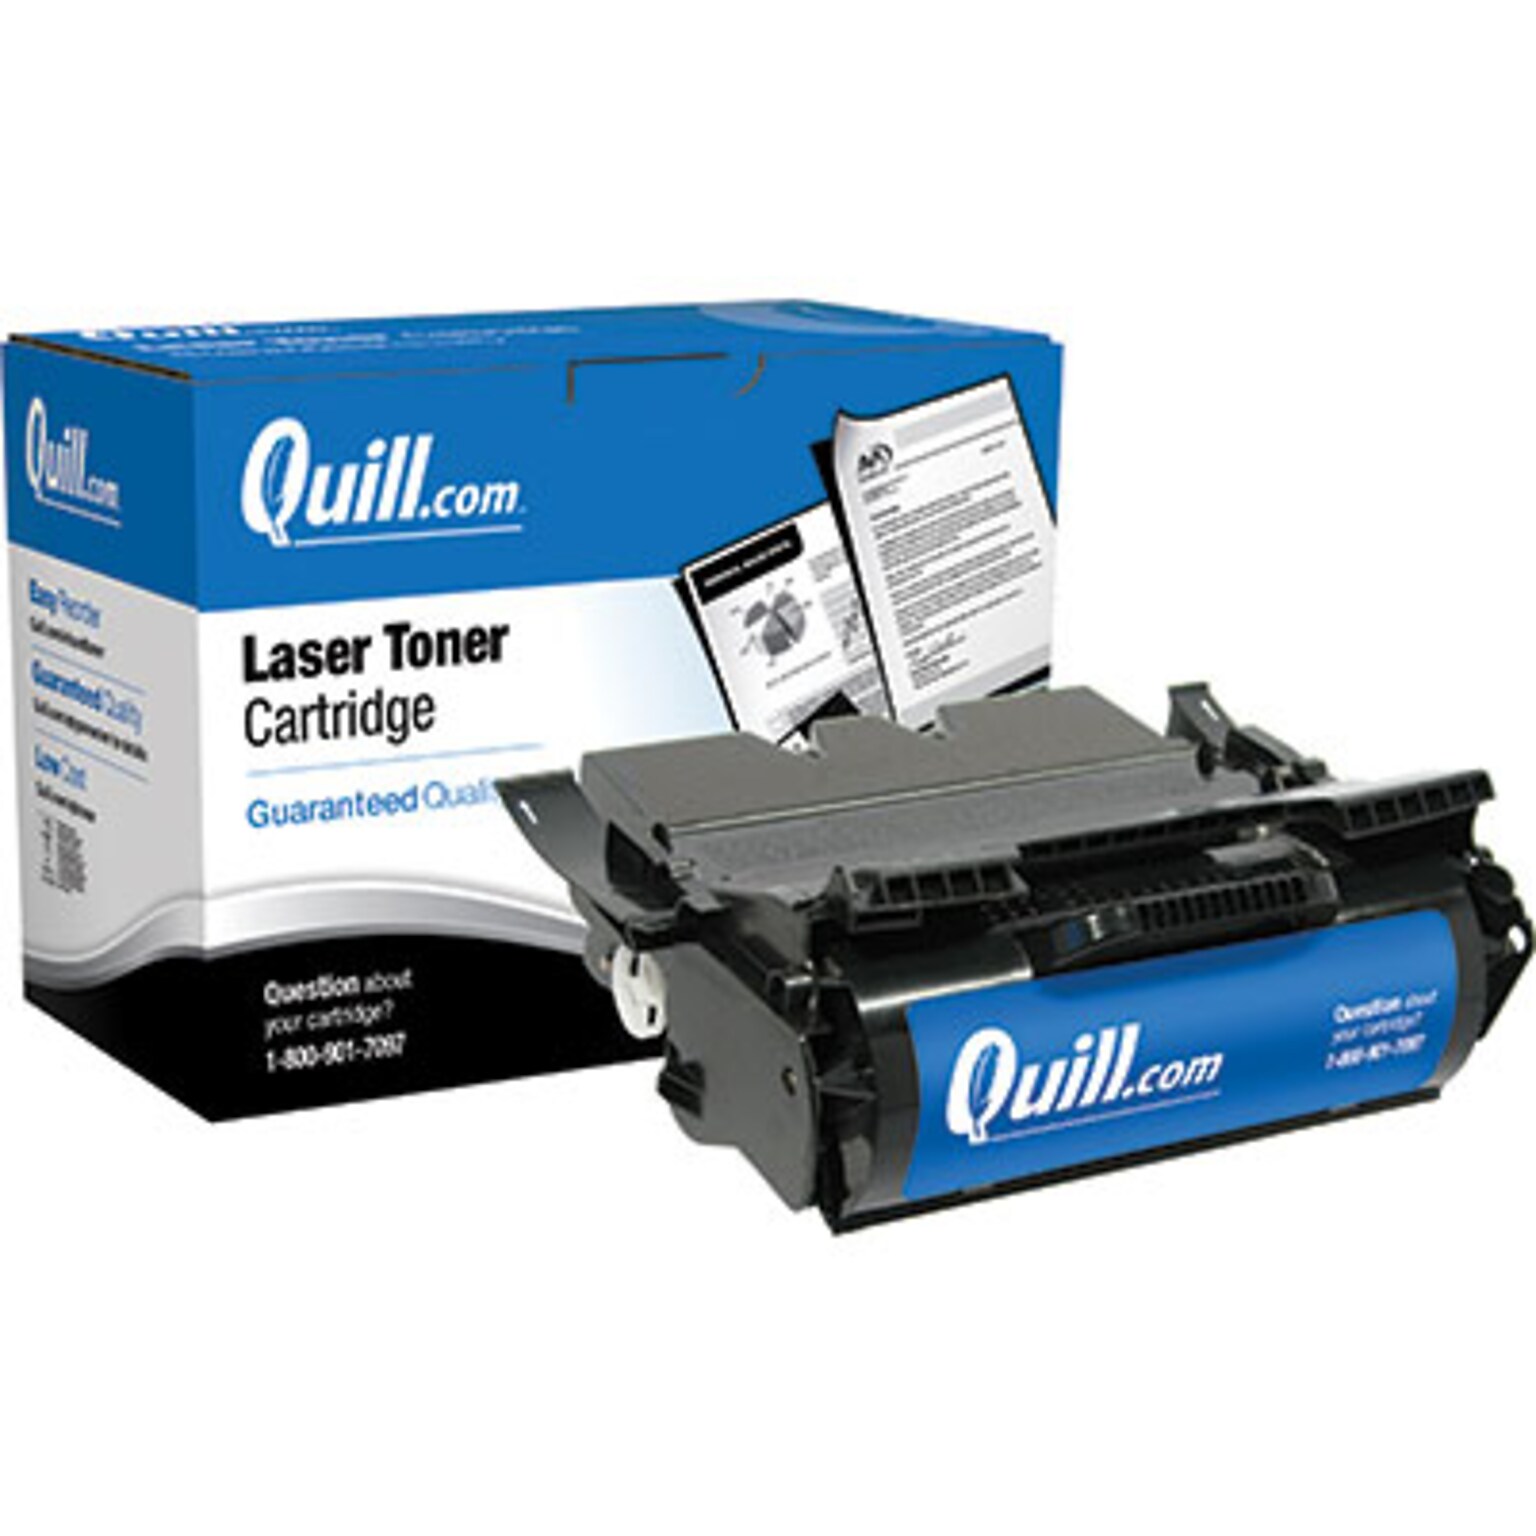 Quill Brand Remanufactured Laser Toner Cartridge for Lexmark™ T644 High Yield Black (100% Satisfaction Guaranteed)